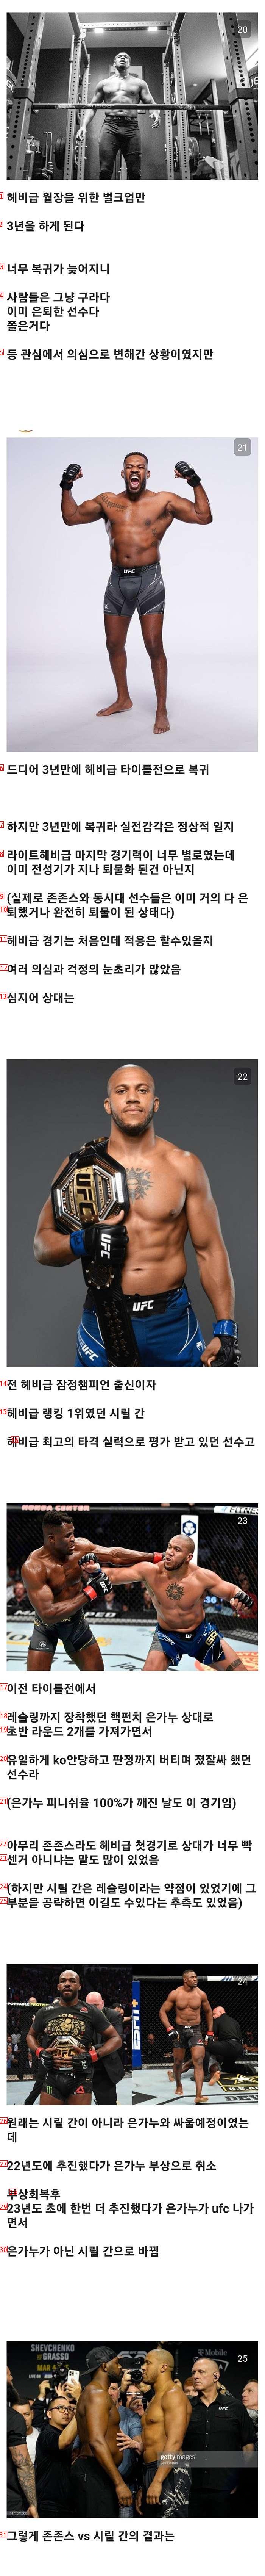 the best player in mixed martial arts history